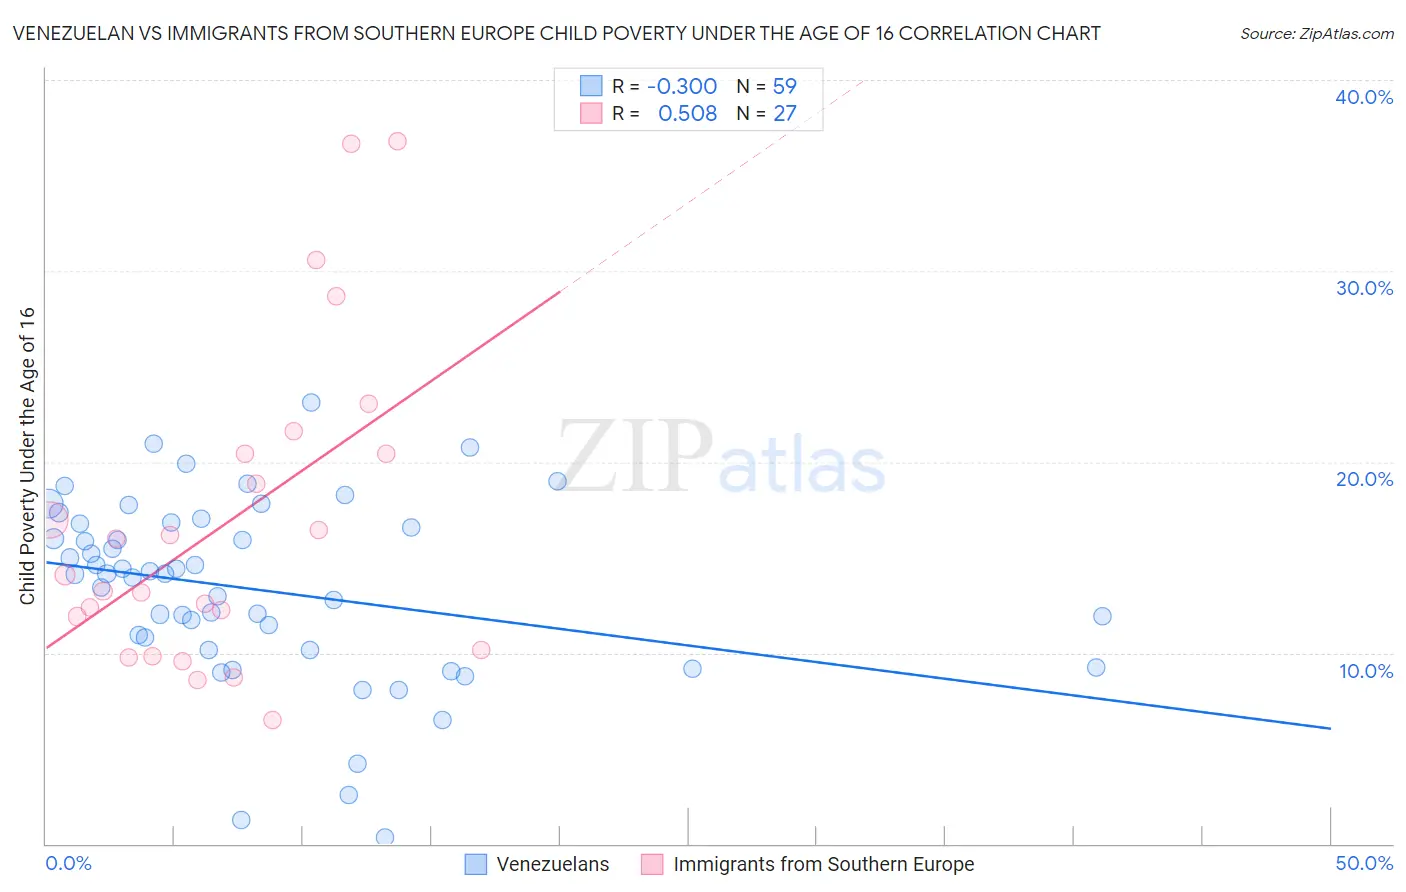 Venezuelan vs Immigrants from Southern Europe Child Poverty Under the Age of 16